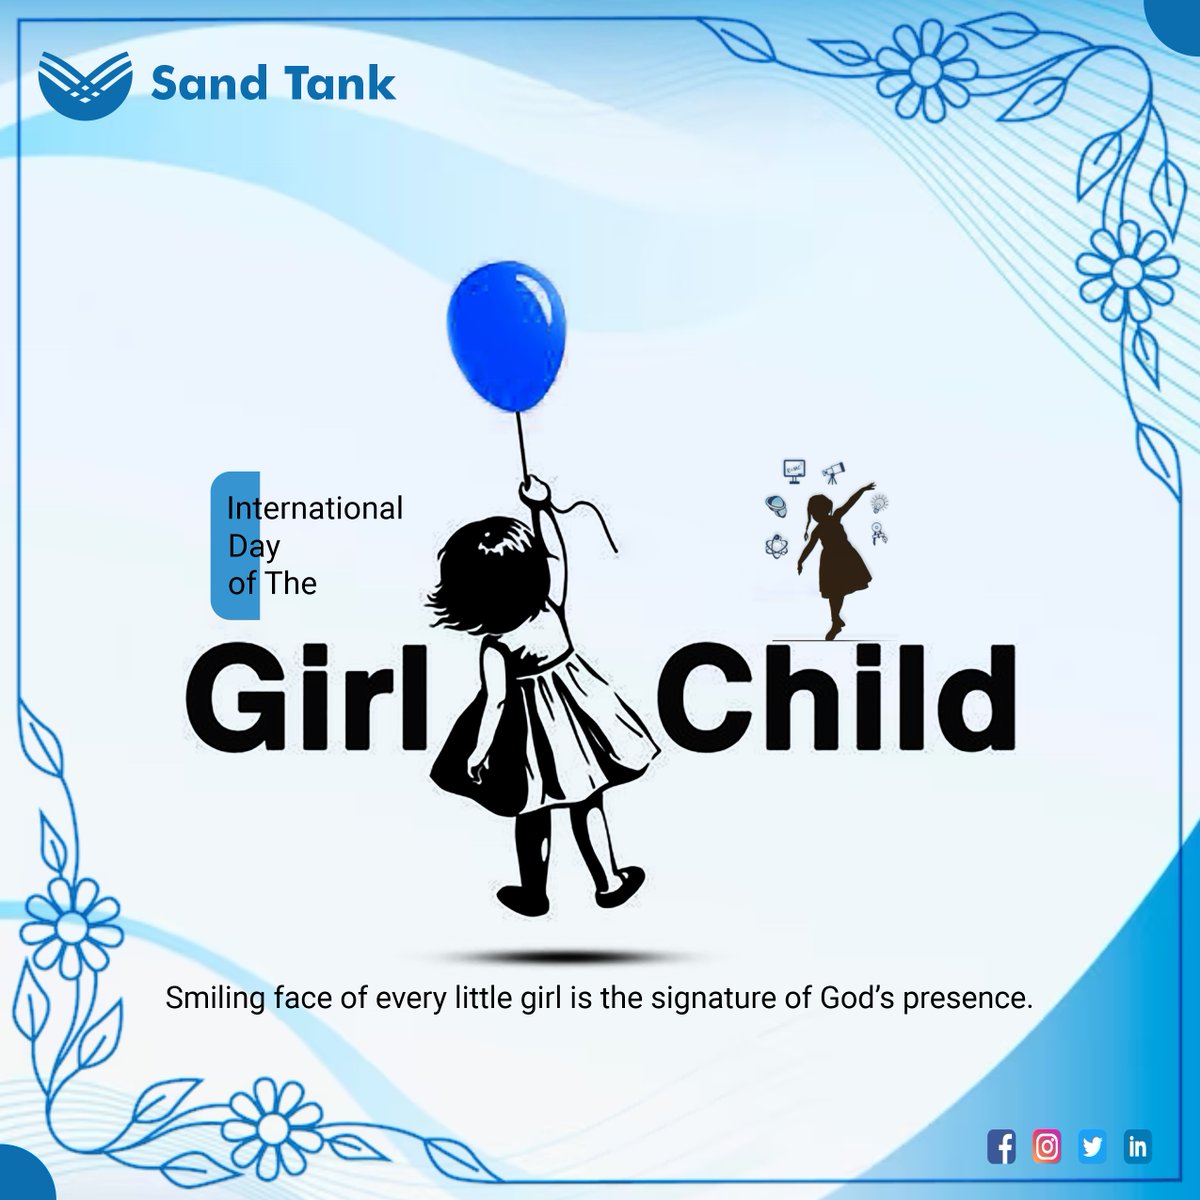 A happy and healthy girl child with a safe and progressive environment is what we all dream for. Wishing a very Happy International Girl Child Day.

#Sandtankfoundation #EmpowerHerFuture #GirlChildRights #Girlchildday #Internationalgirlchildday #InternationalDayoftheGirl